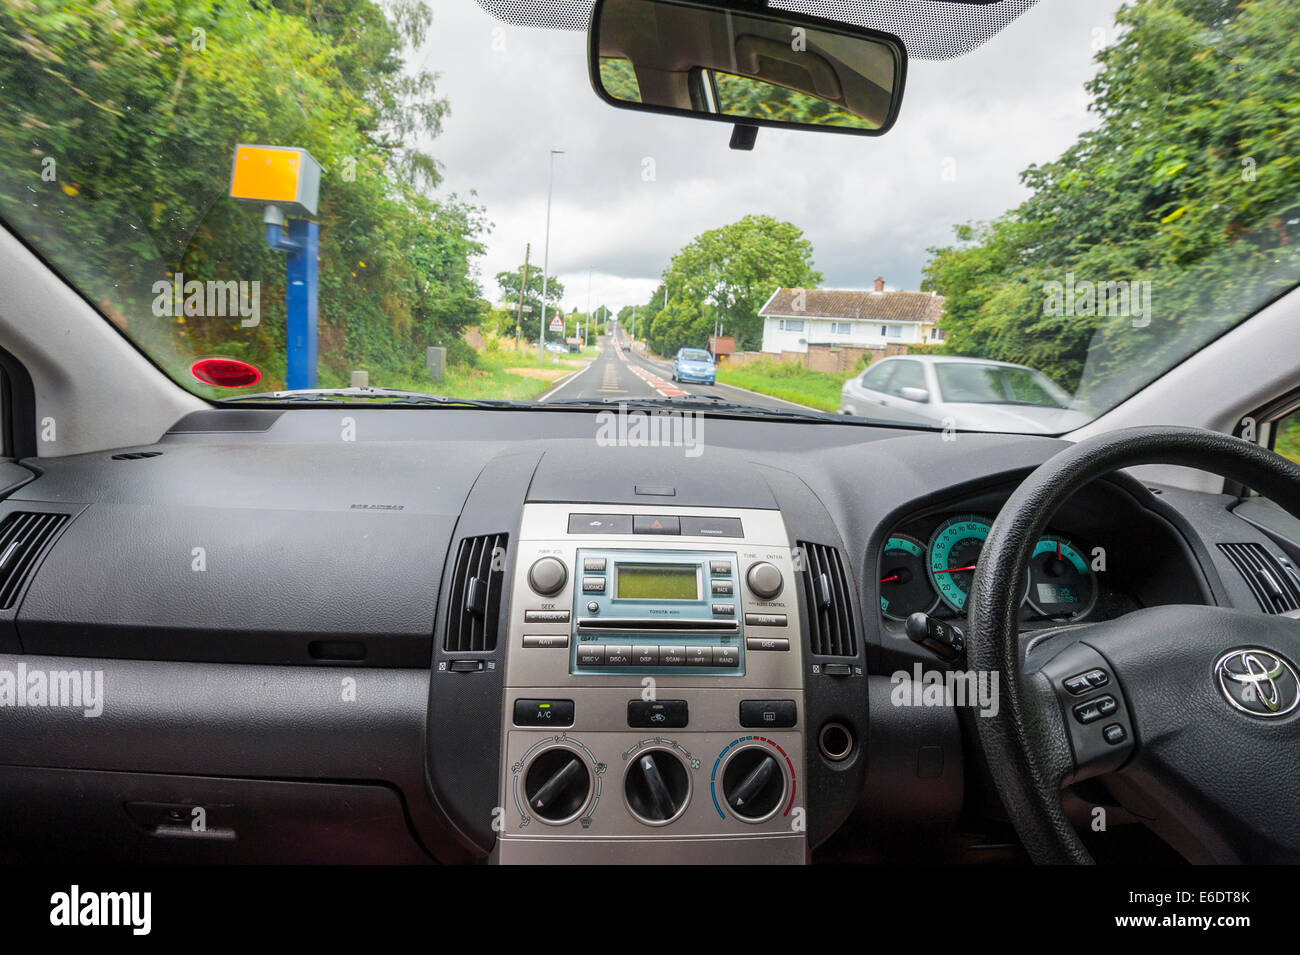 A person driving into a speed camera catch zone shown from the interior of the car in the Uk Stock Photo